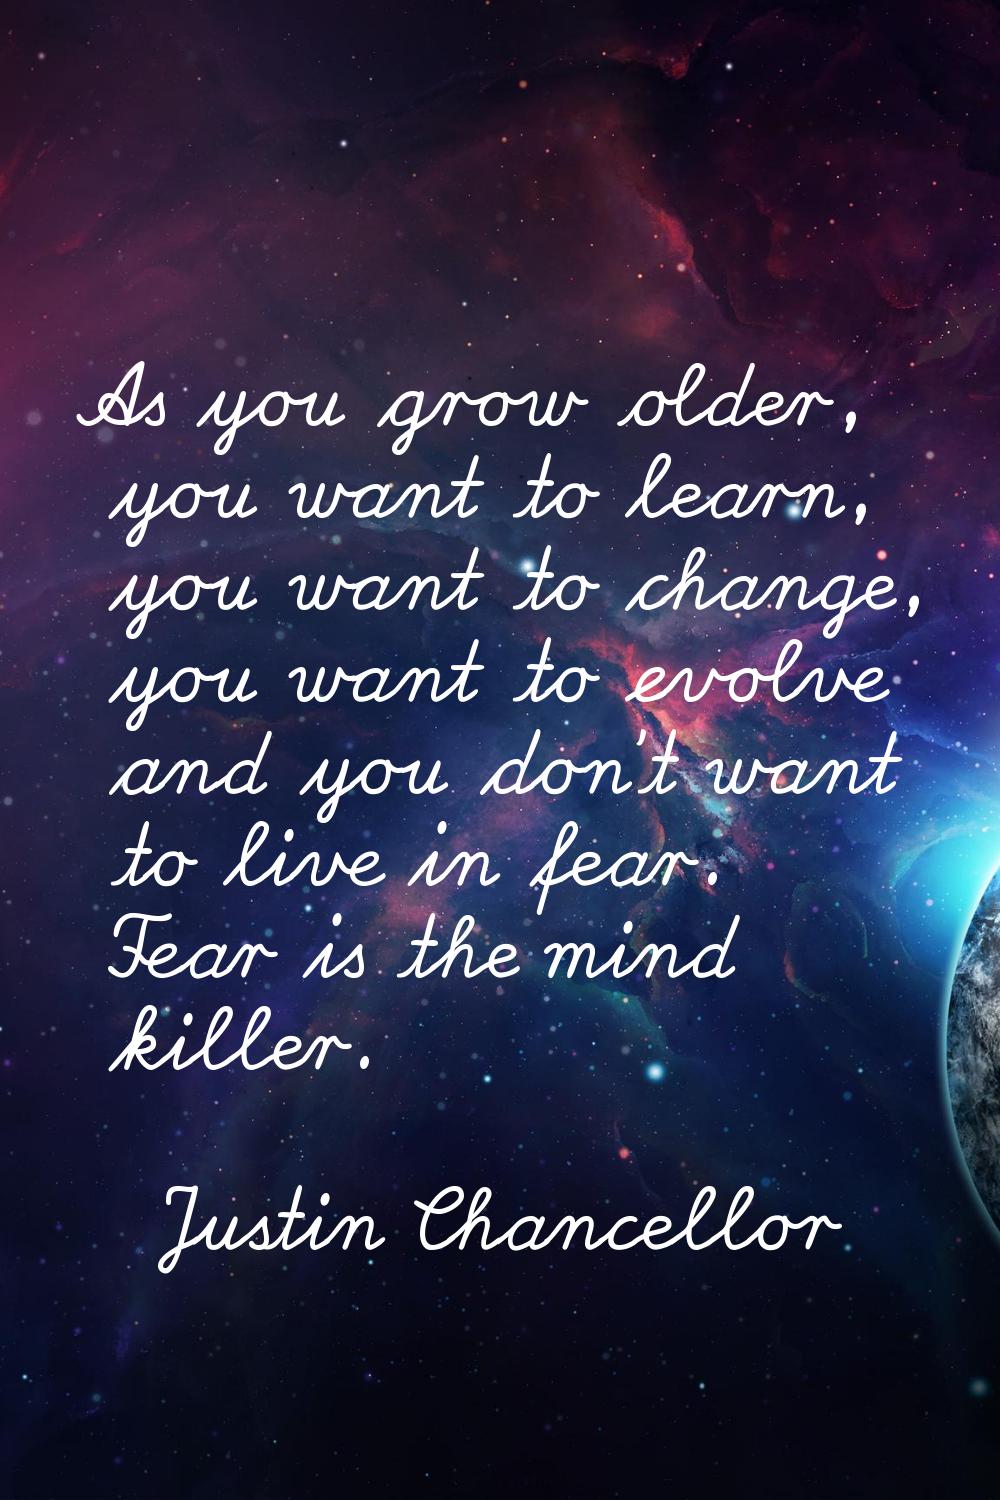 As you grow older, you want to learn, you want to change, you want to evolve and you don't want to 